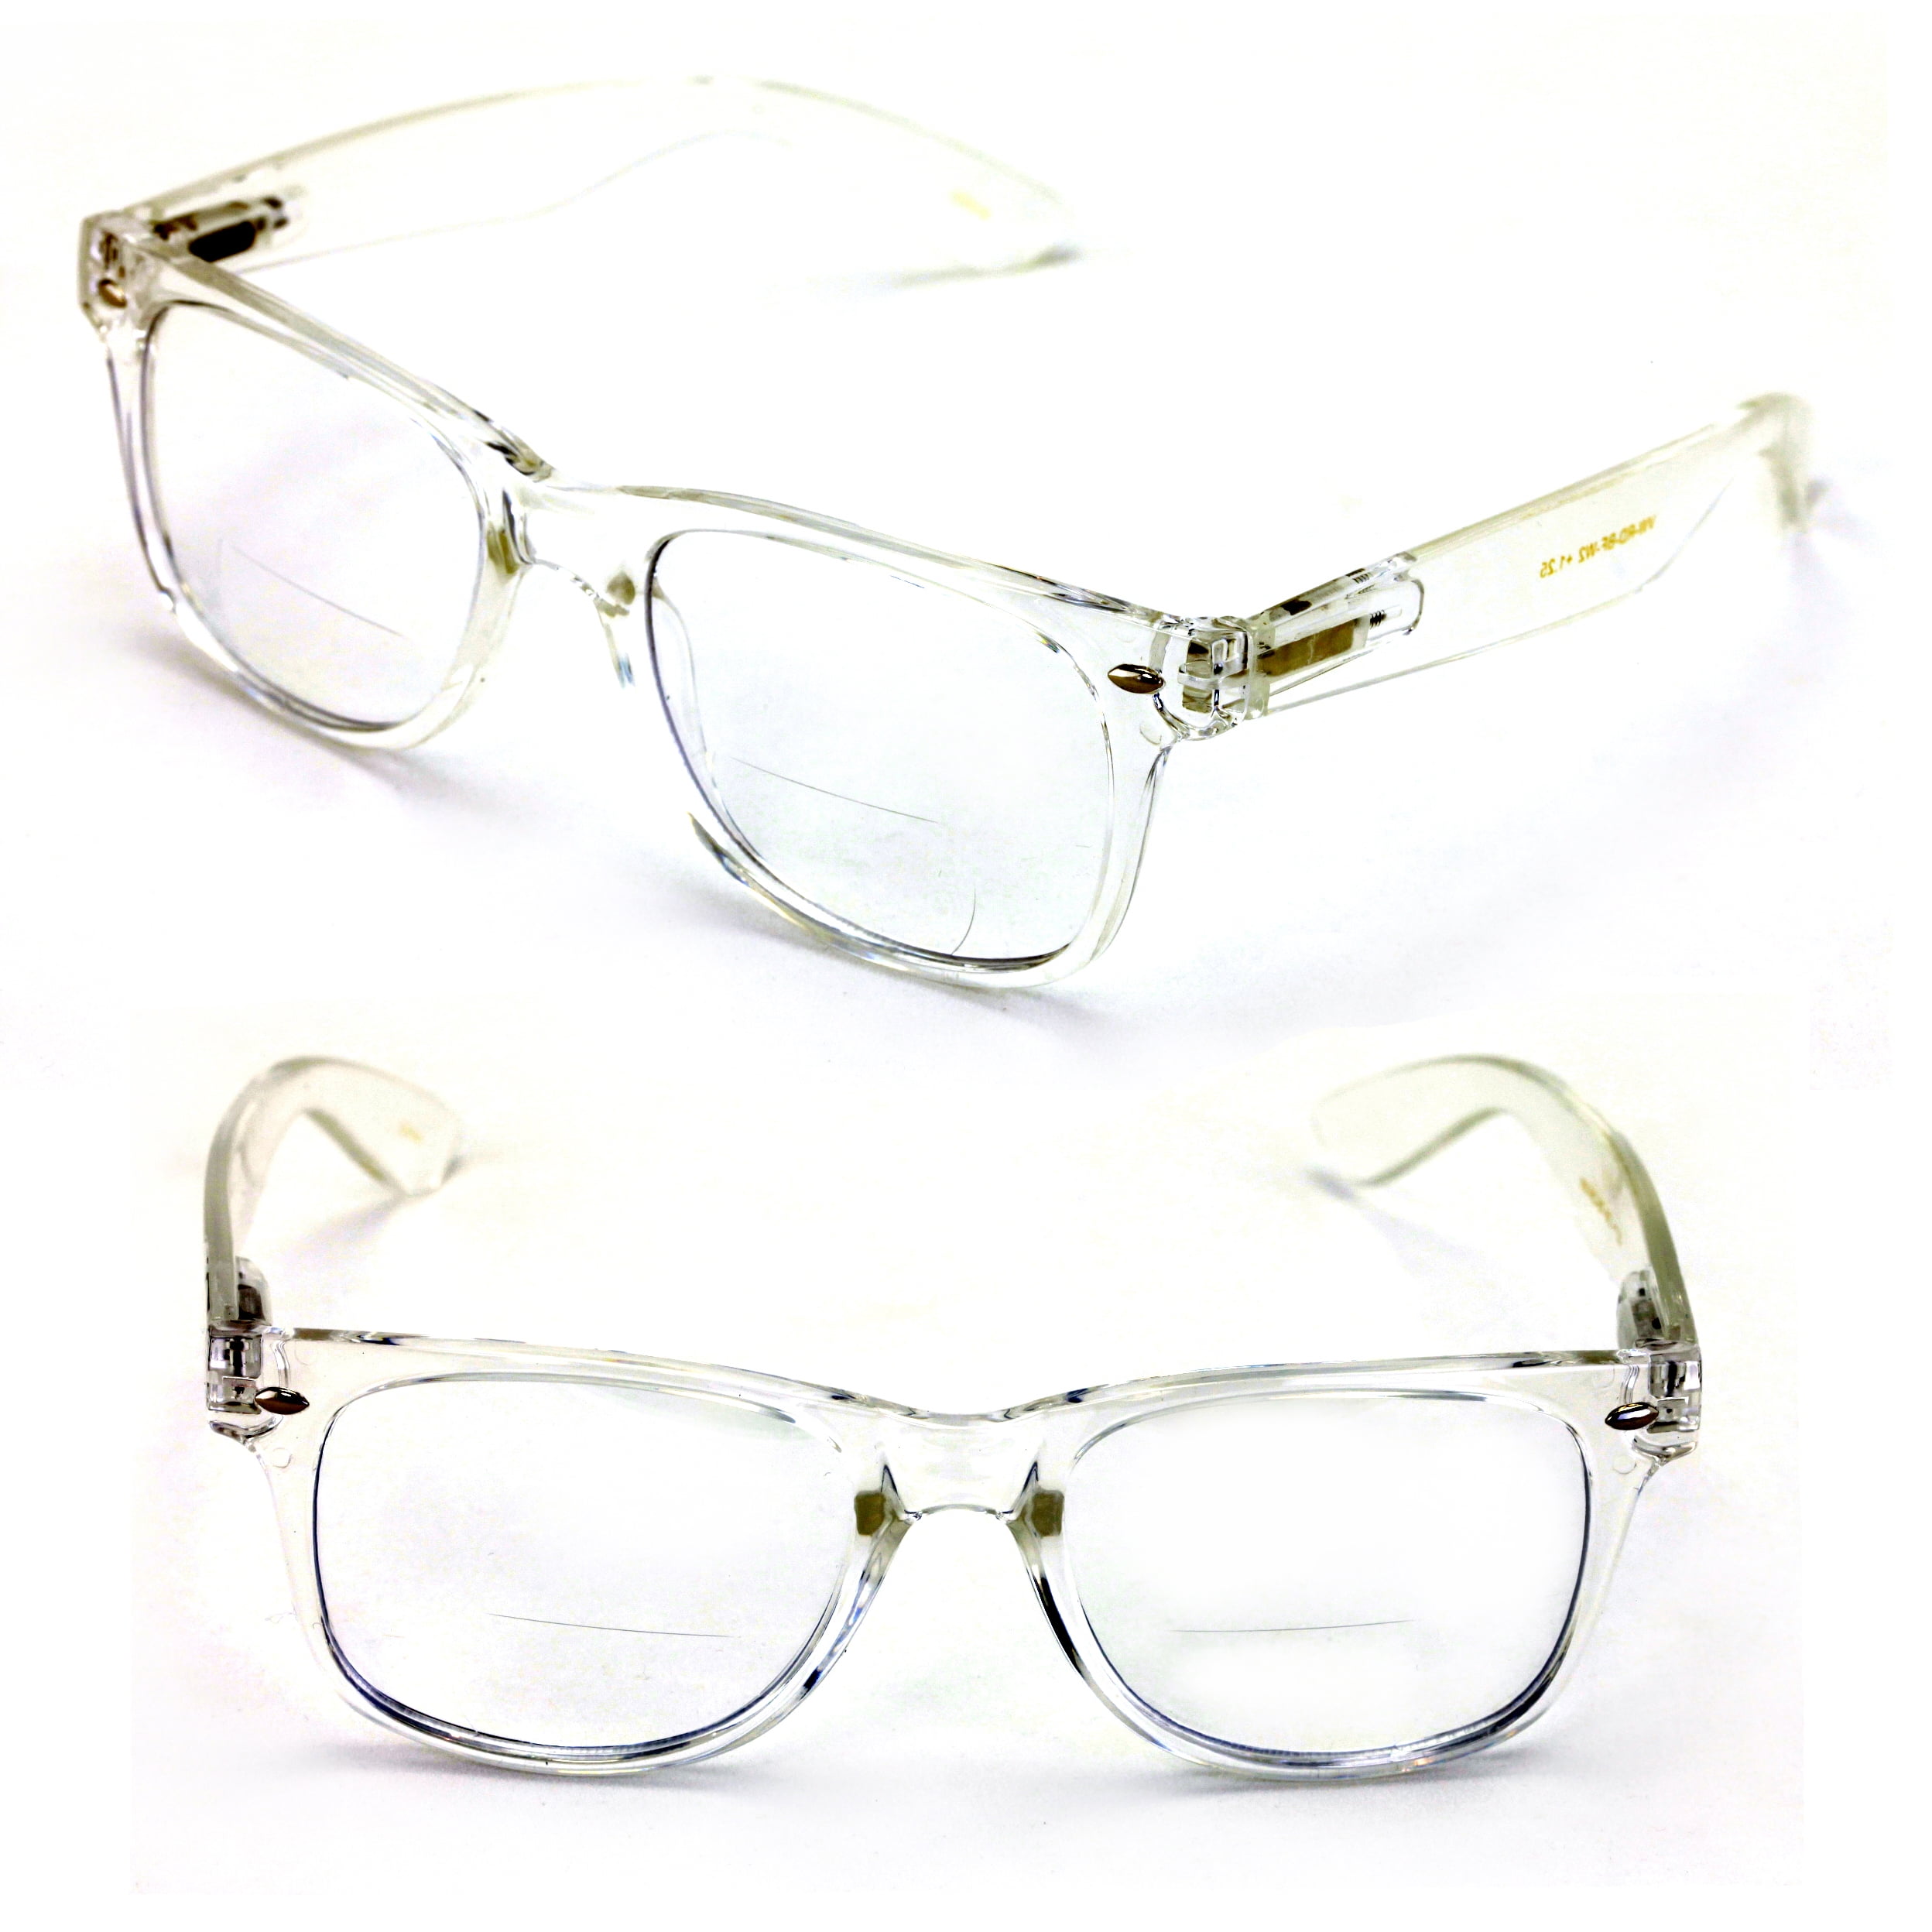 Thin Frame Fashion Clear Len Glasses Brandless Classy Spring Loaded Hinges 